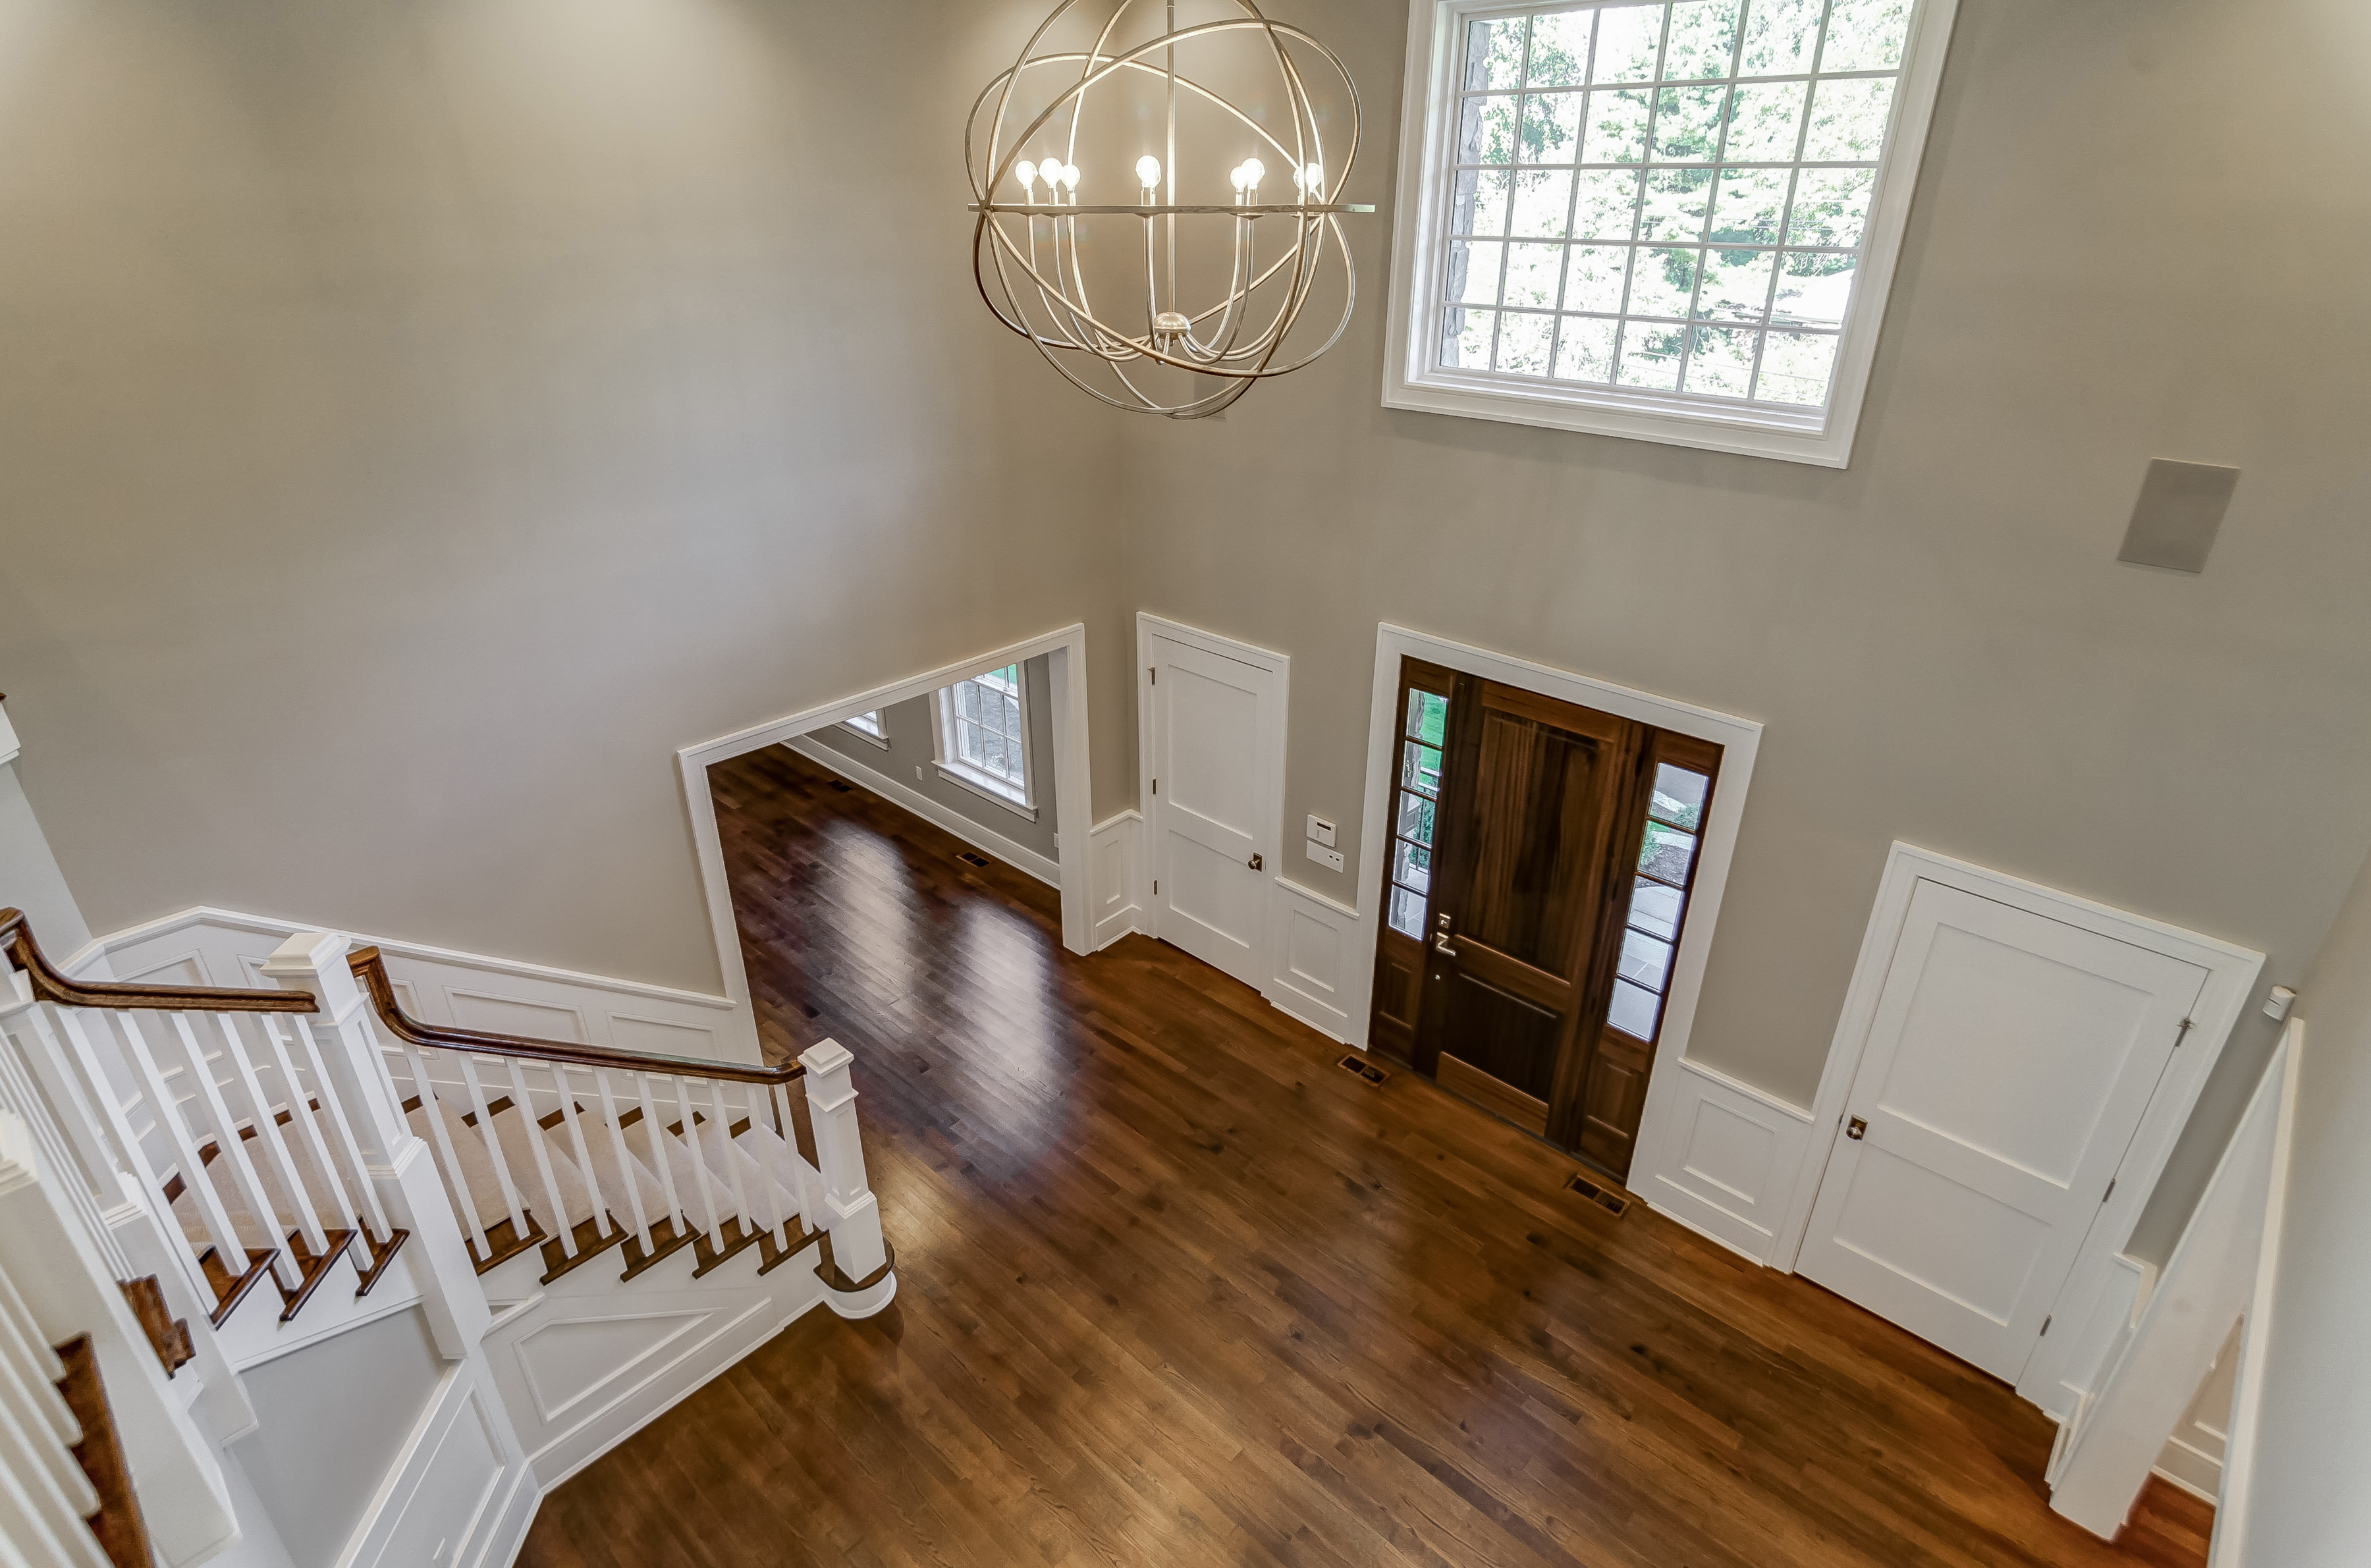 16 – View from Second Floor Landing of Gorgeous Entrance Hall – 20 Troy Drive, Example of Most Recent Project from Builder